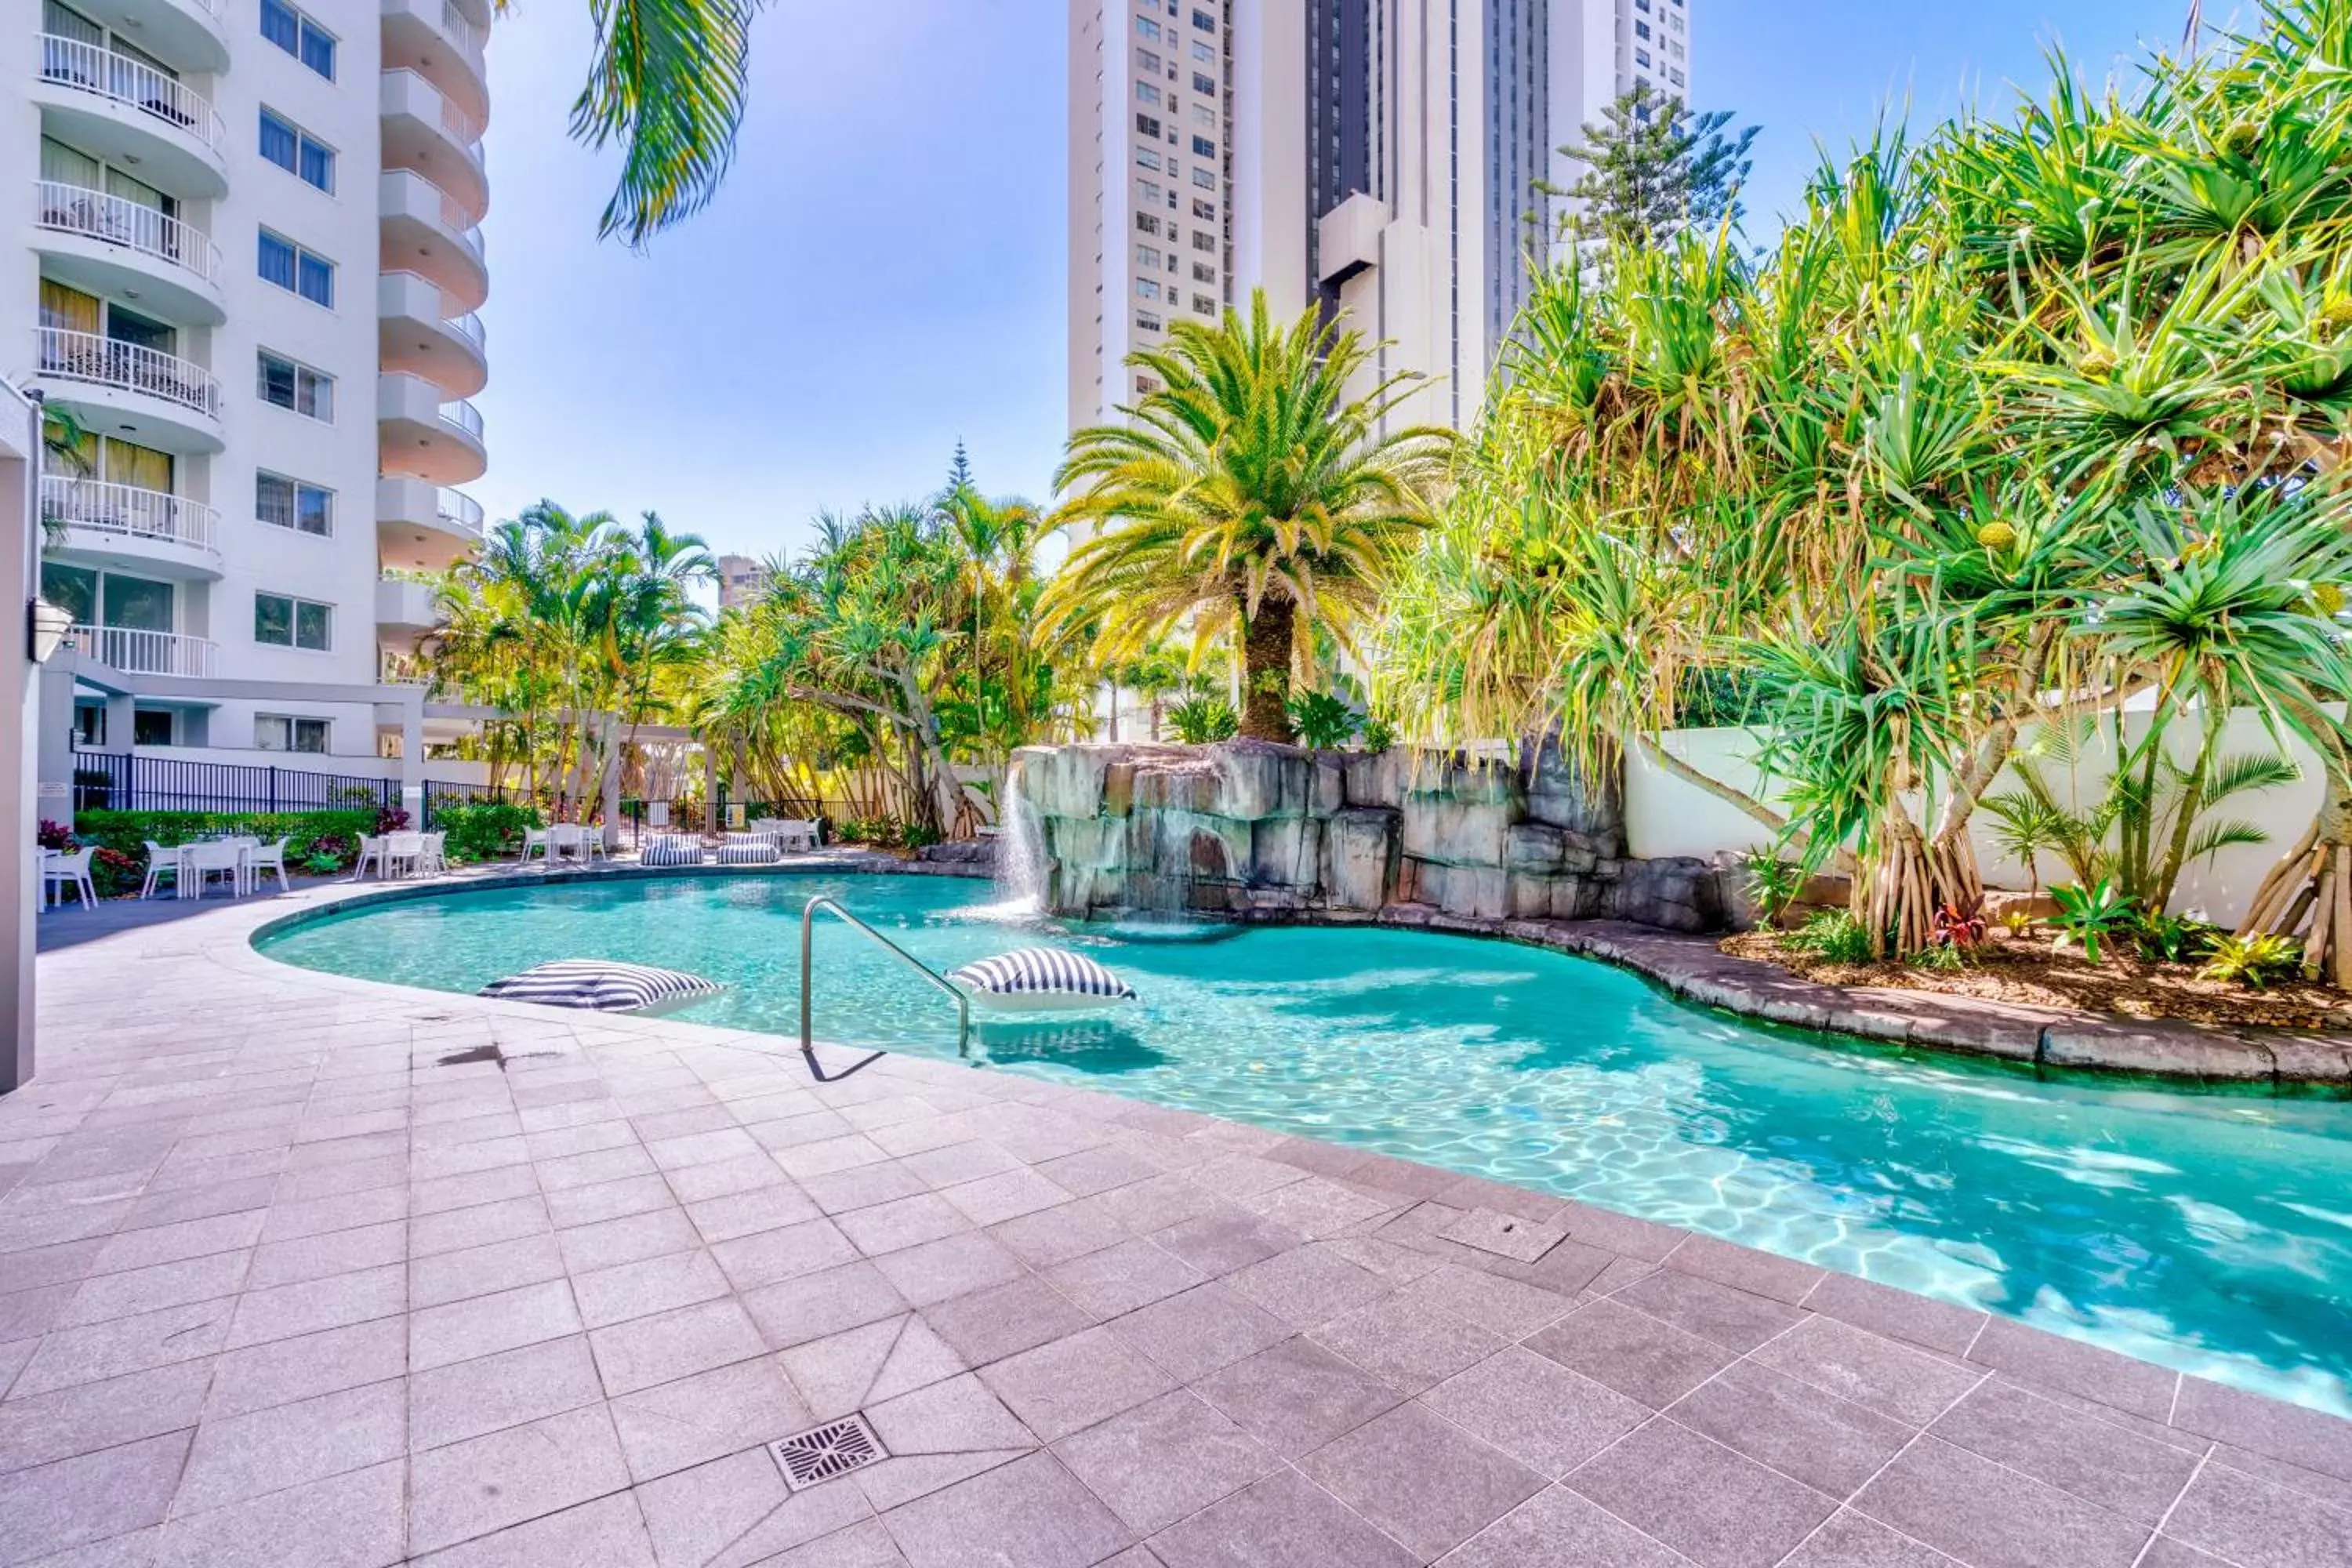 Swimming Pool in Sovereign on the Gold Coast